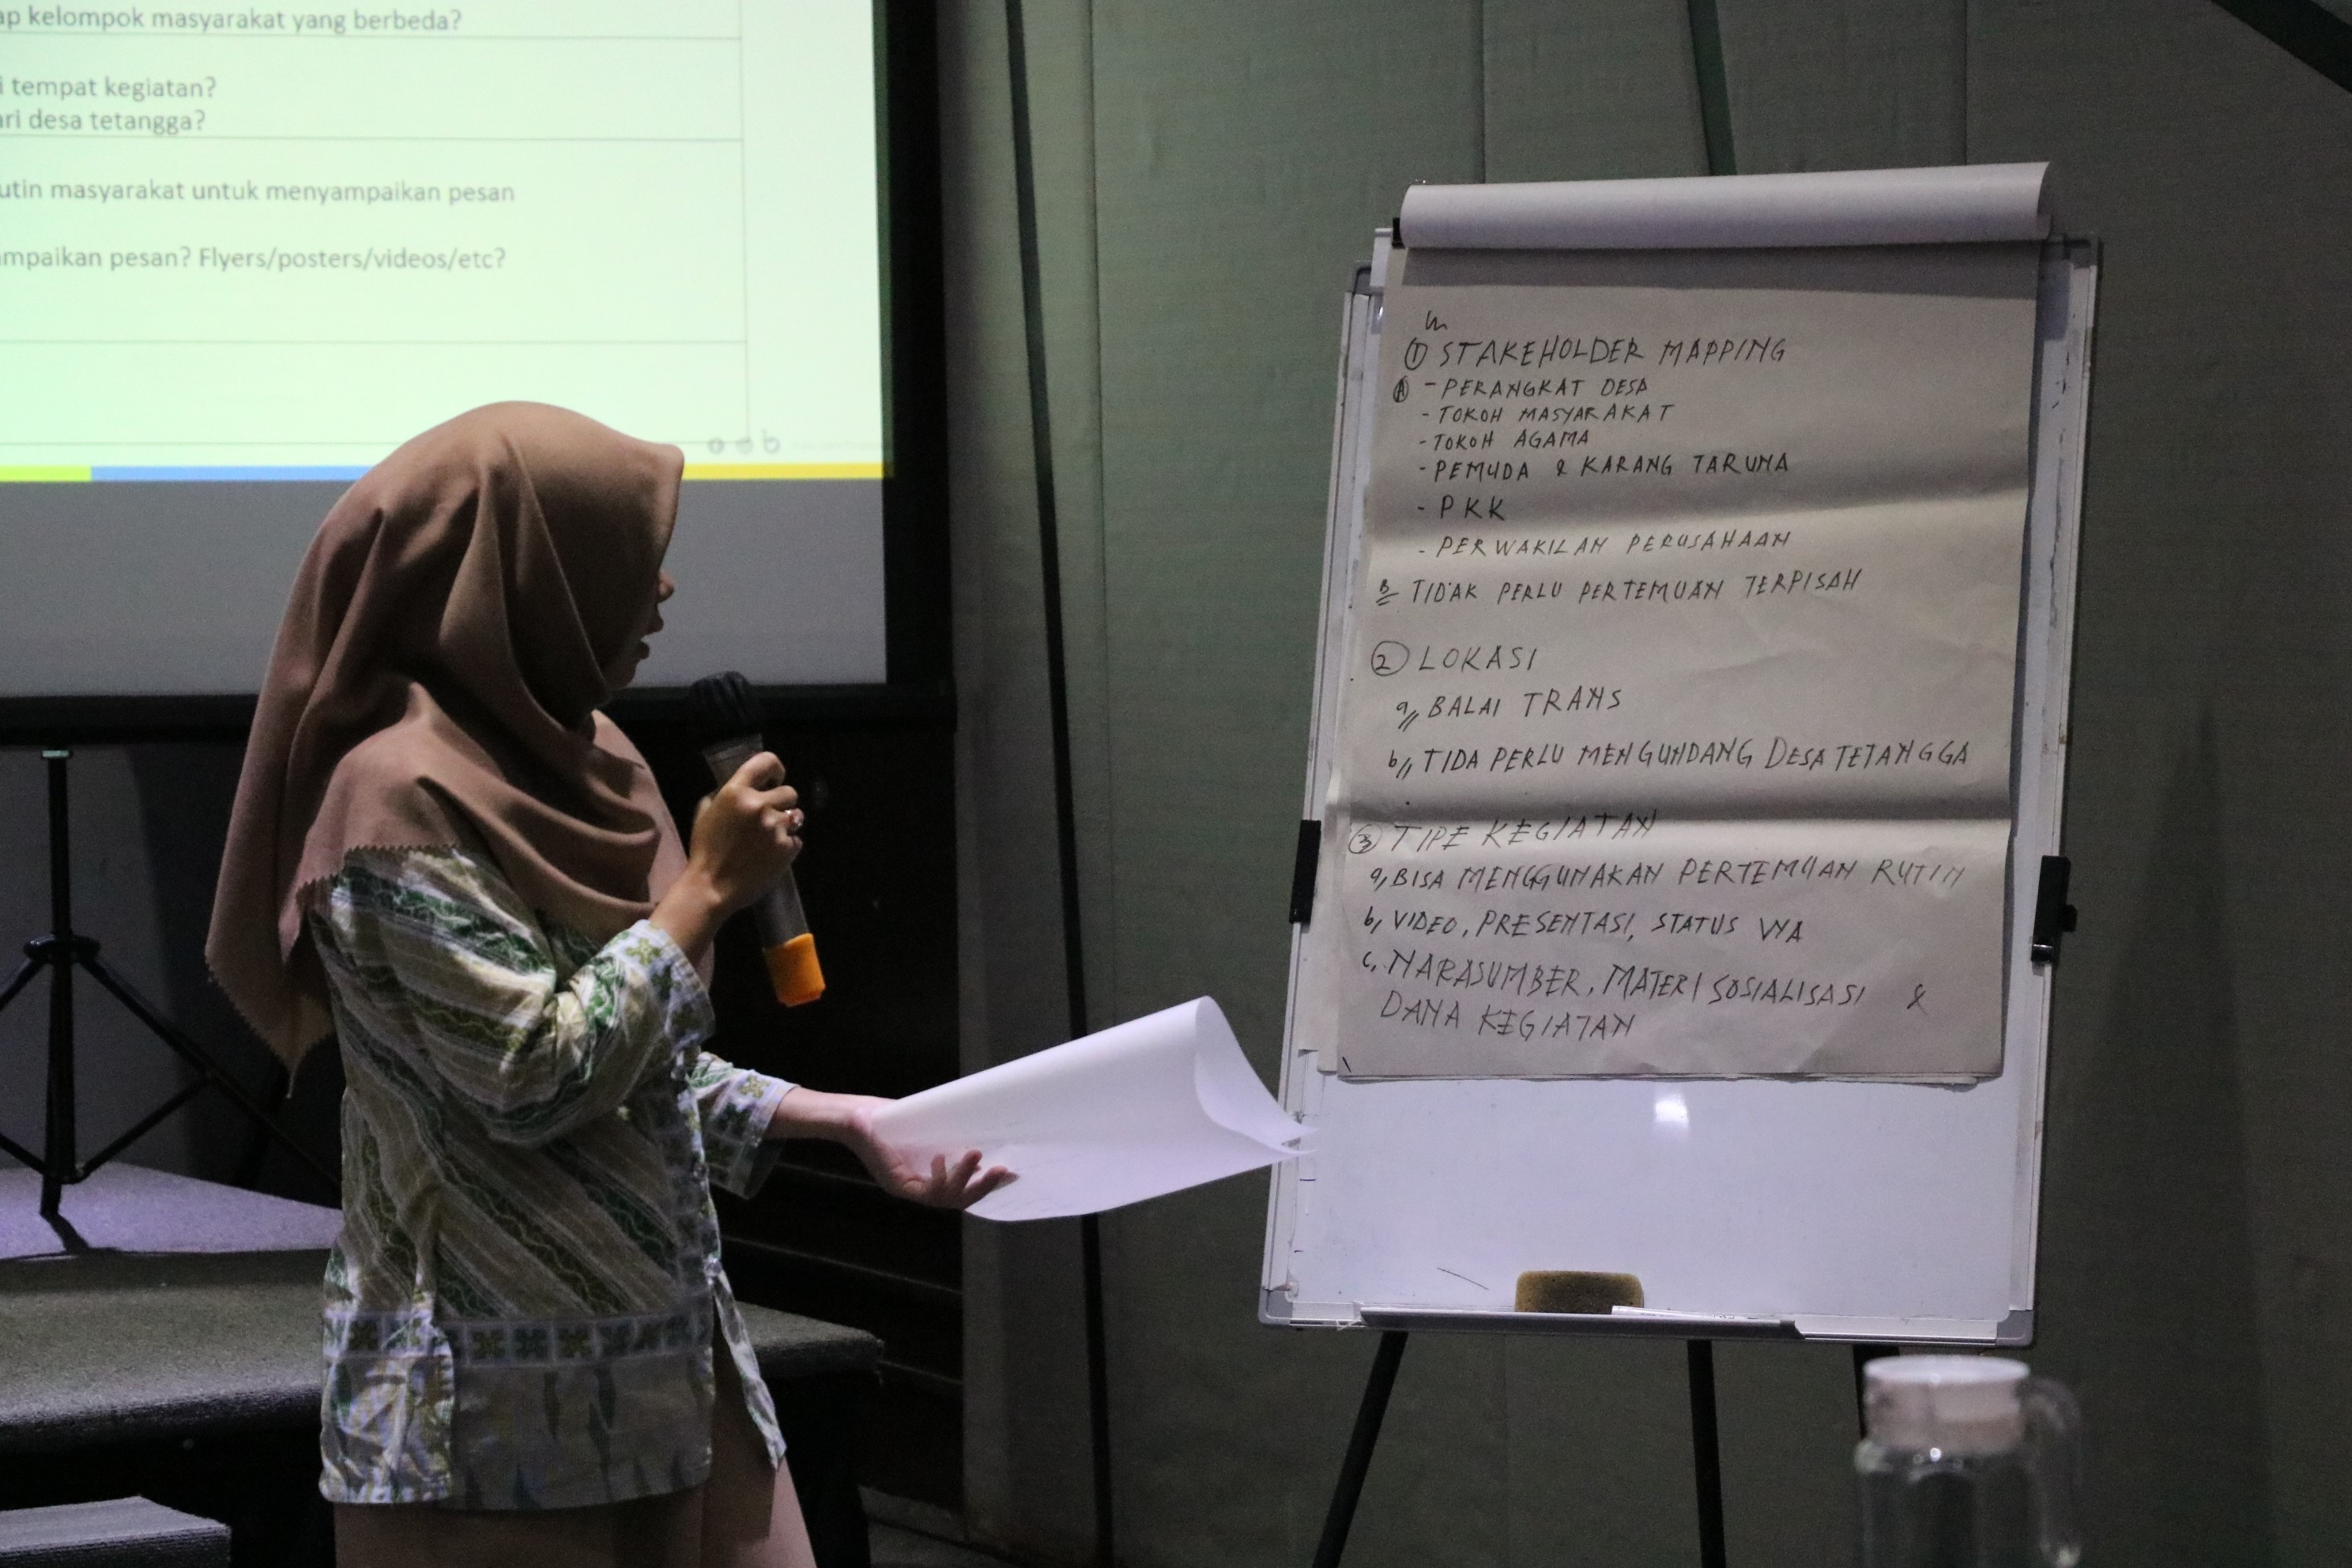 A peat ranger presents her deployment plan. Photo credit: M. Farhan Hersinanda for People for Peat